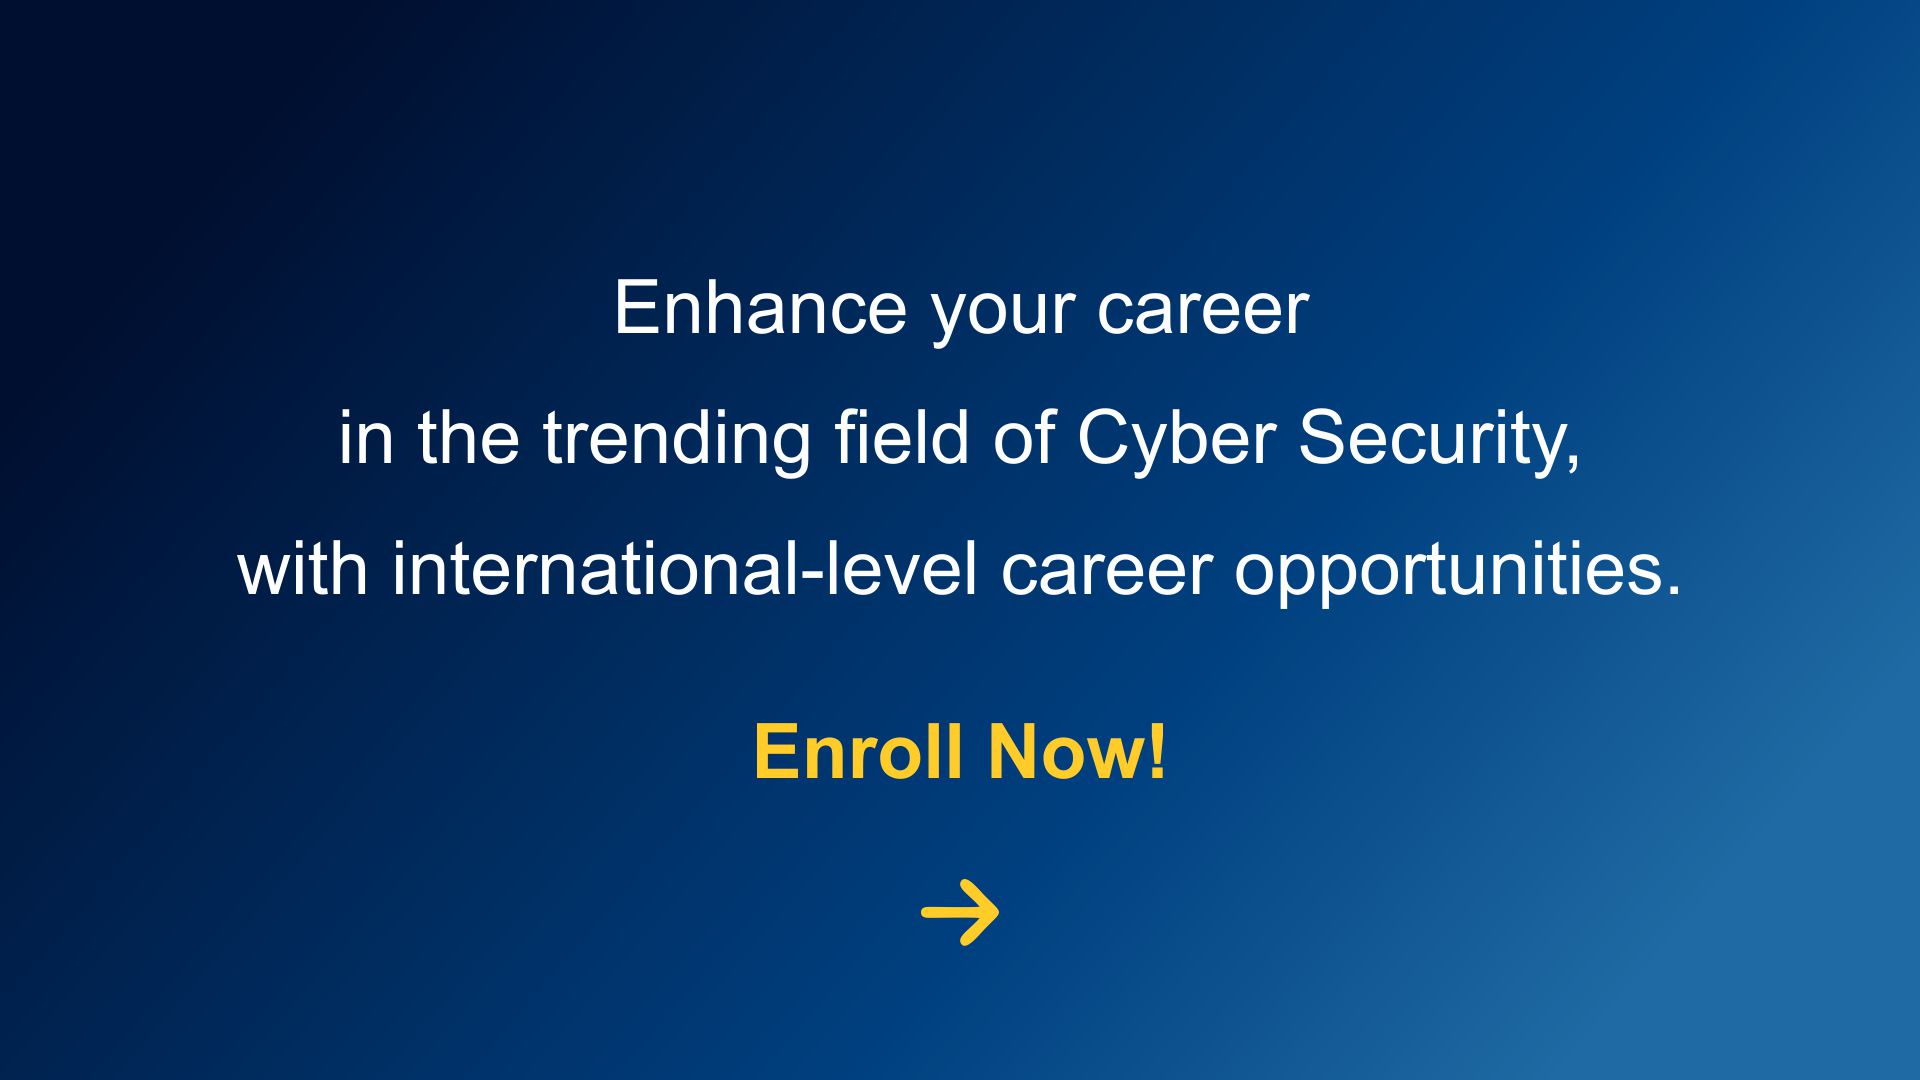 IU International University of Applied Sciences Masters of Science program in Cyber Security